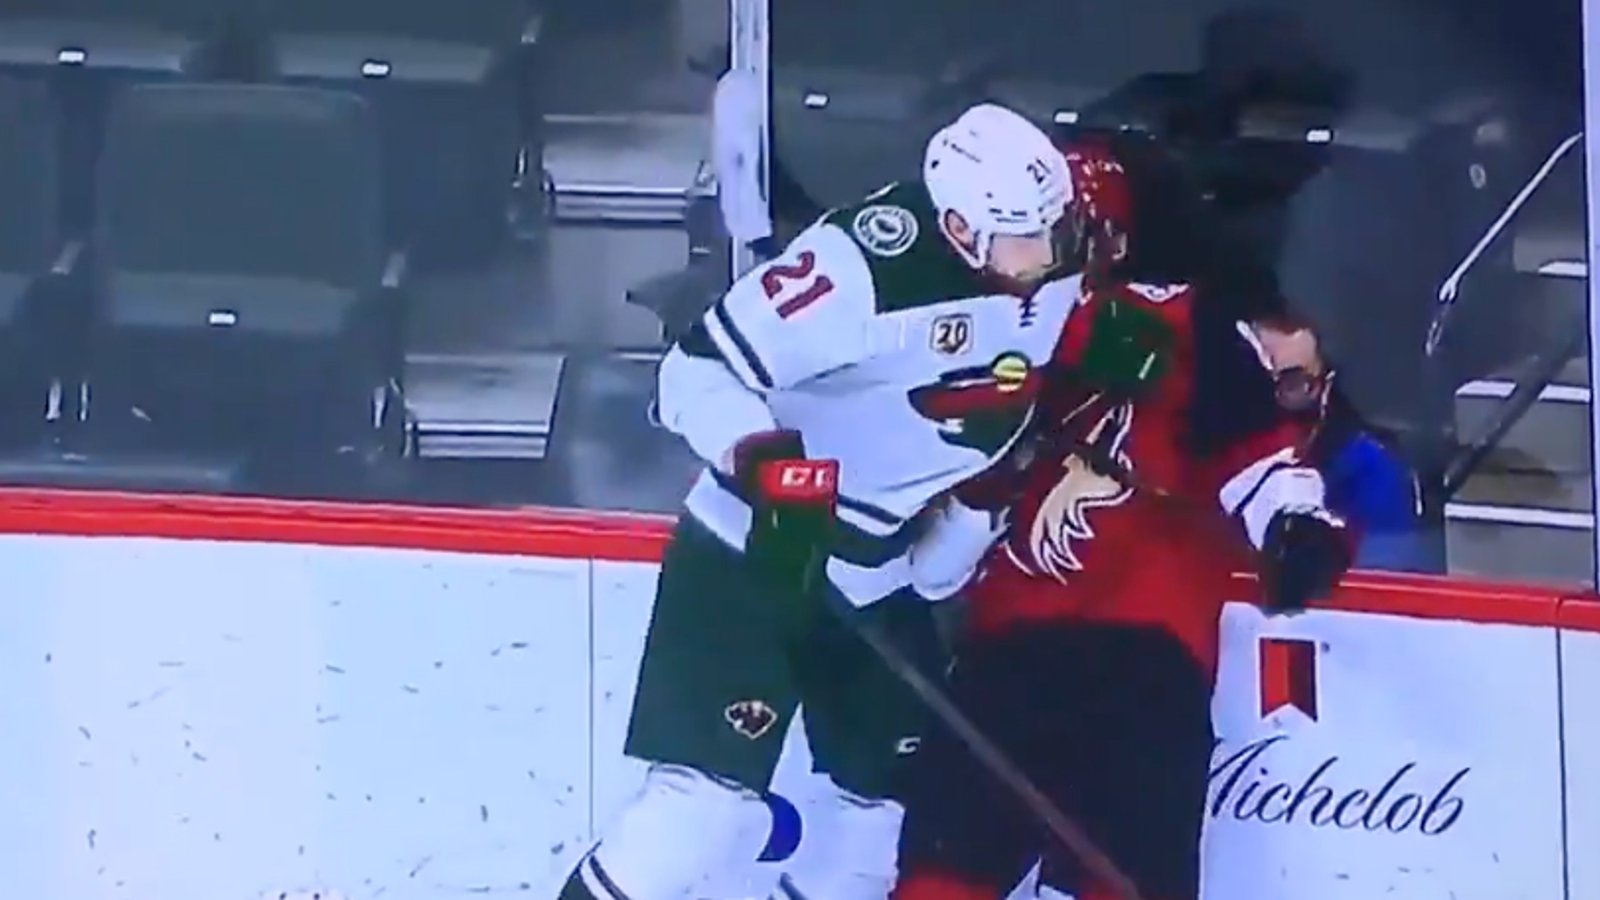 NHL suspends Wild’s Carson Soucy for charging Conor Garland